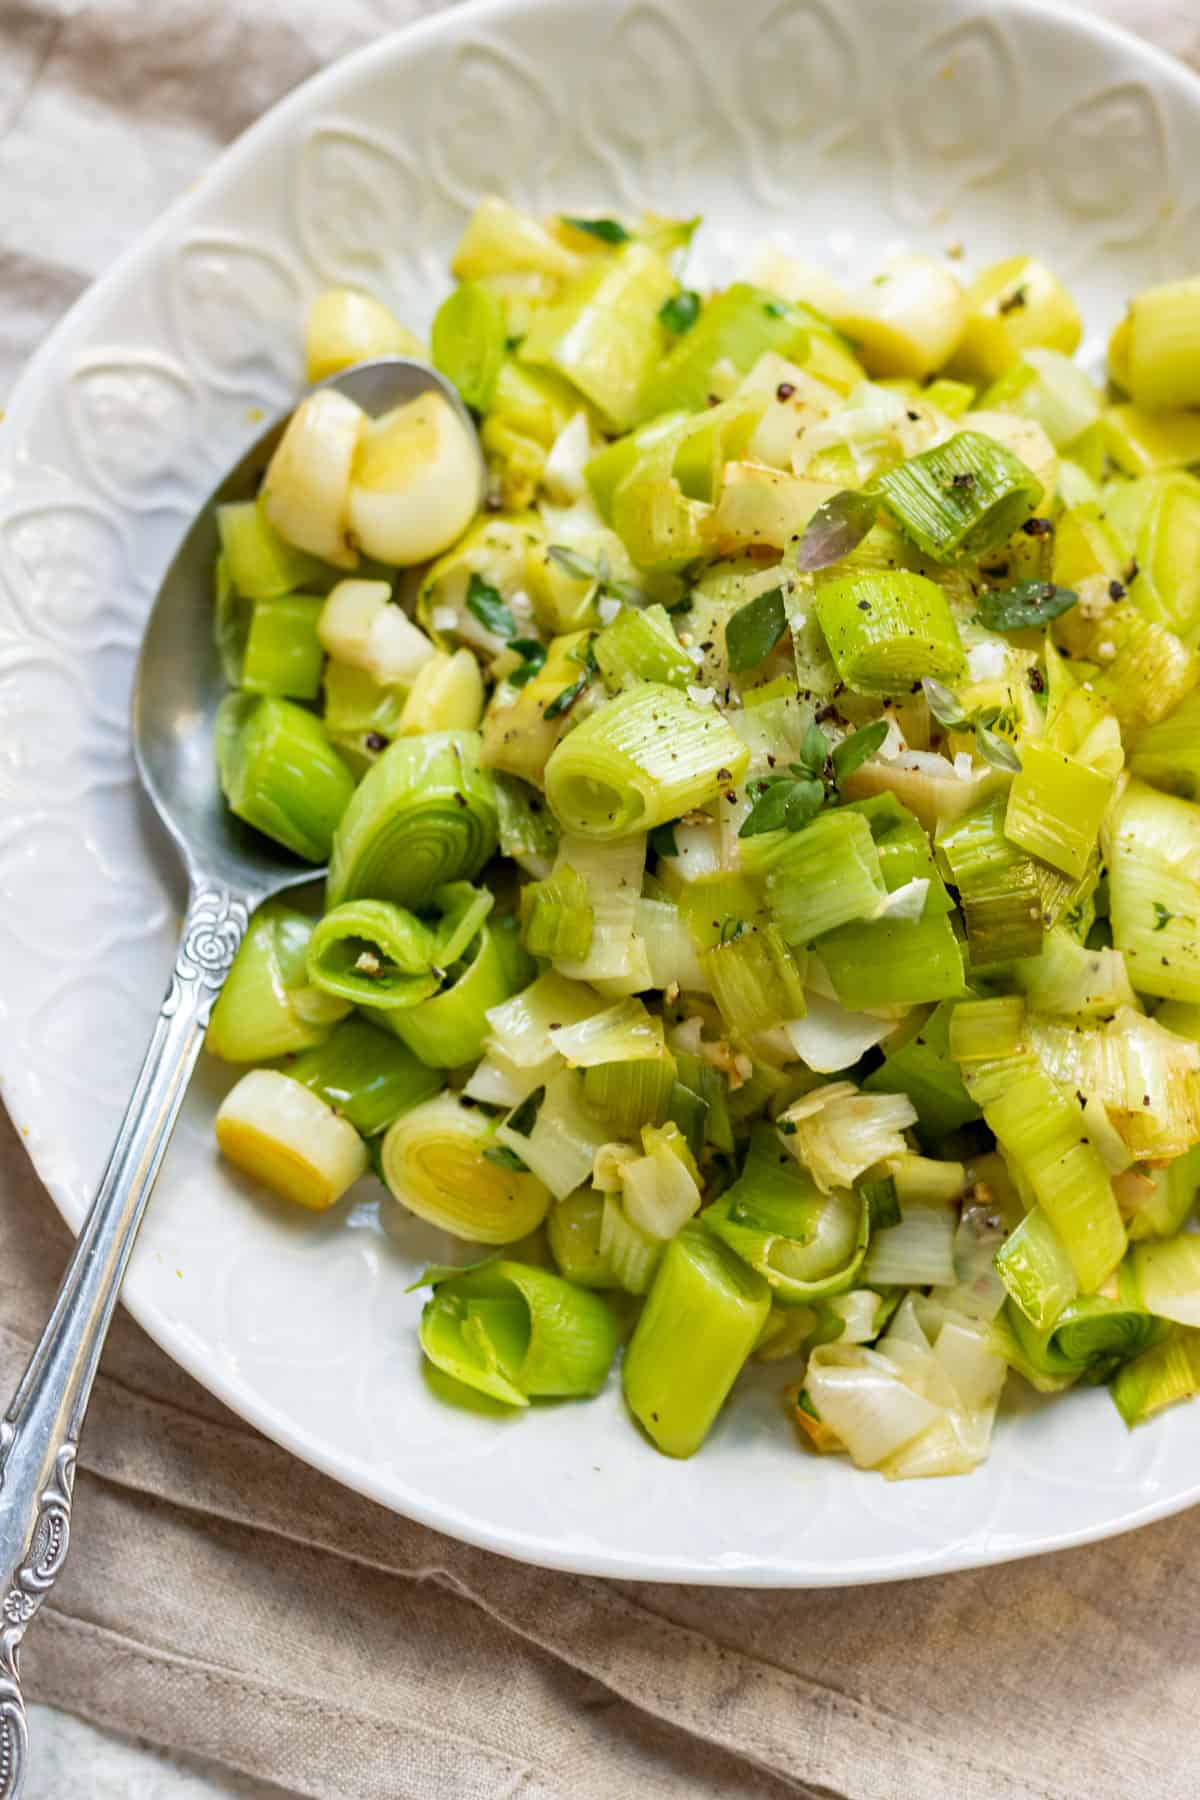 Spoon in a dish of sautéed buttered leeks.